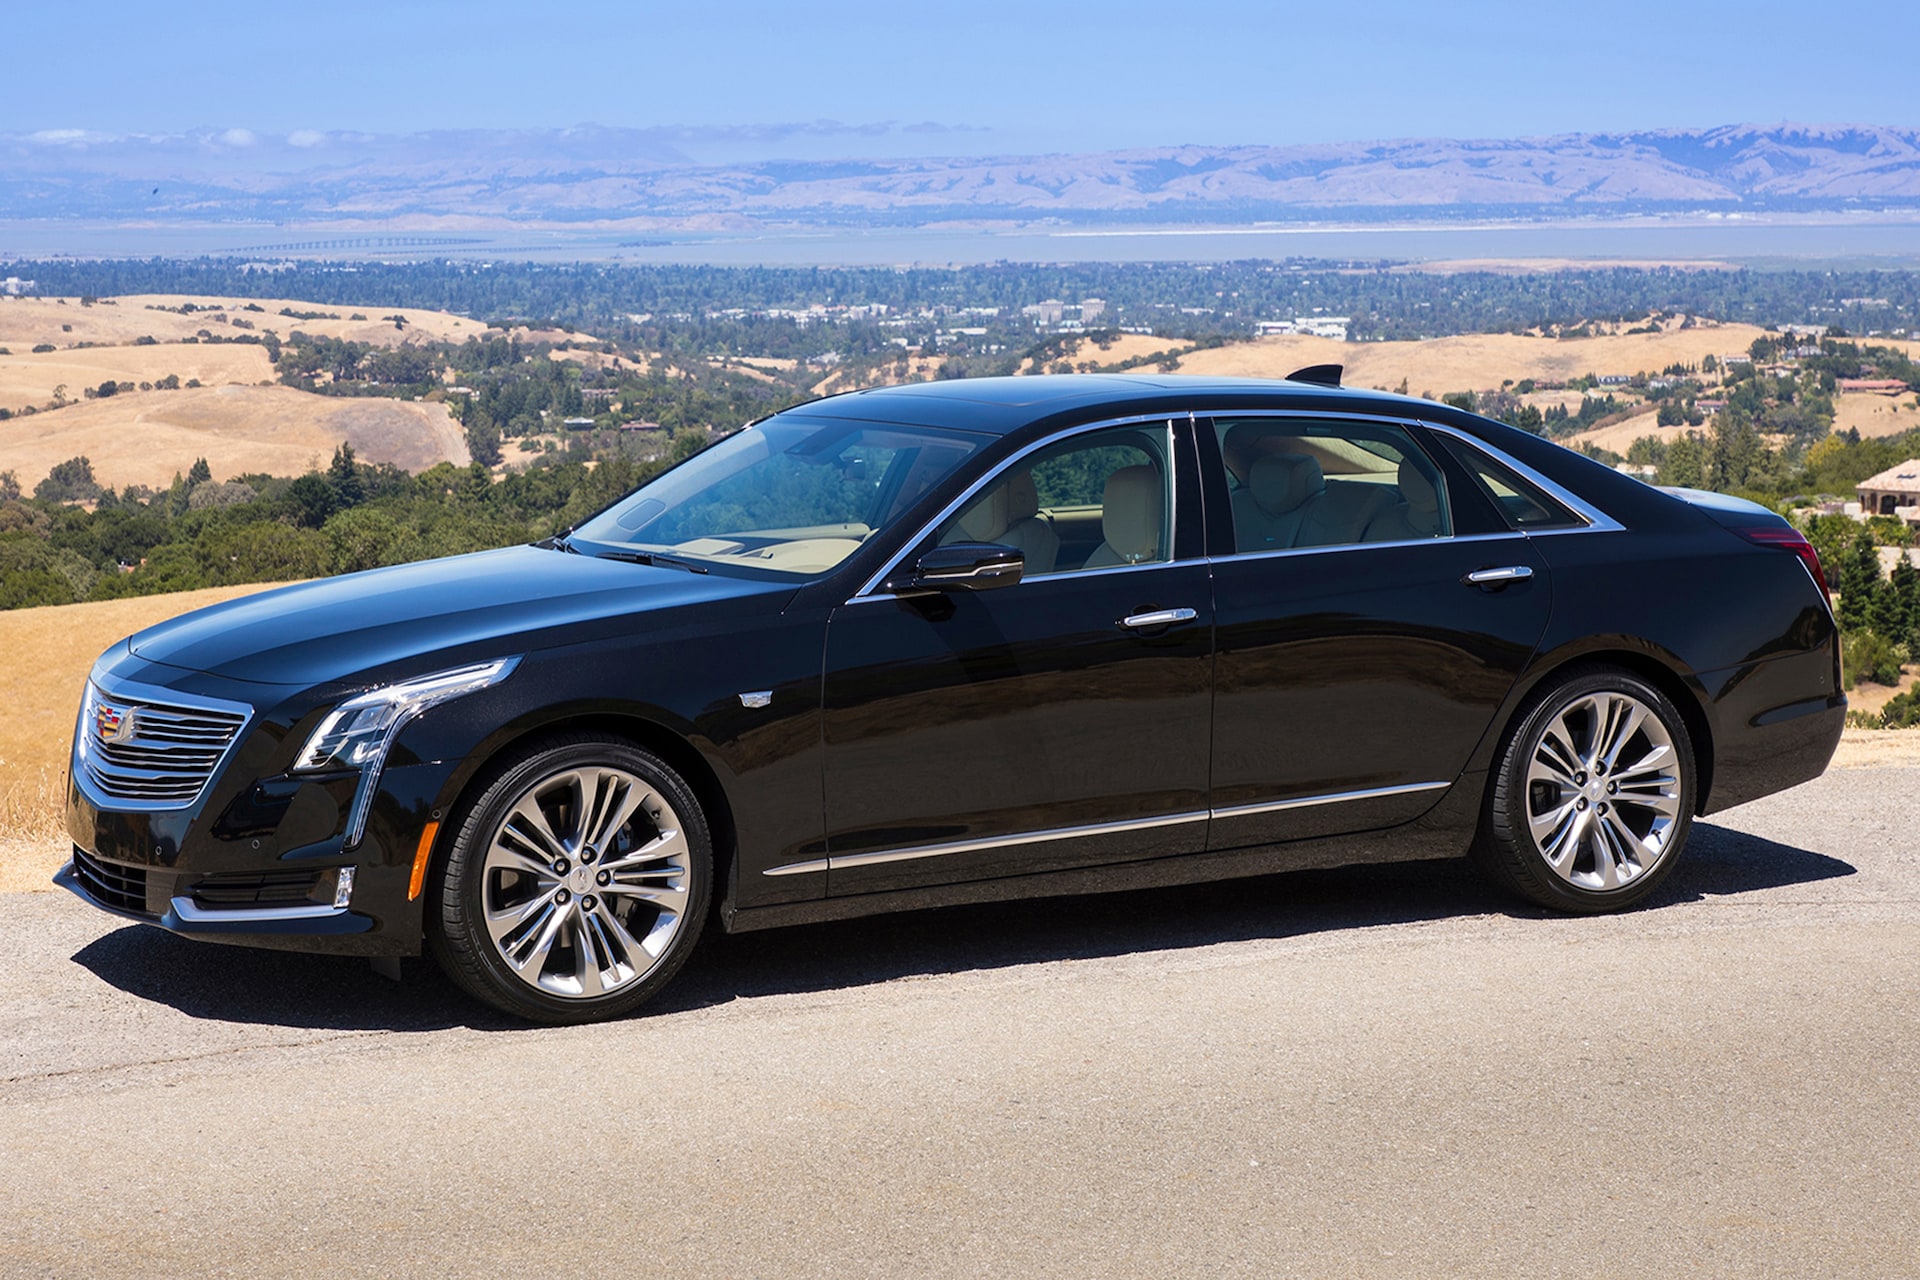 2018 Cadillac CT6 Super Cruise: Can the Car Really Drive Itself?